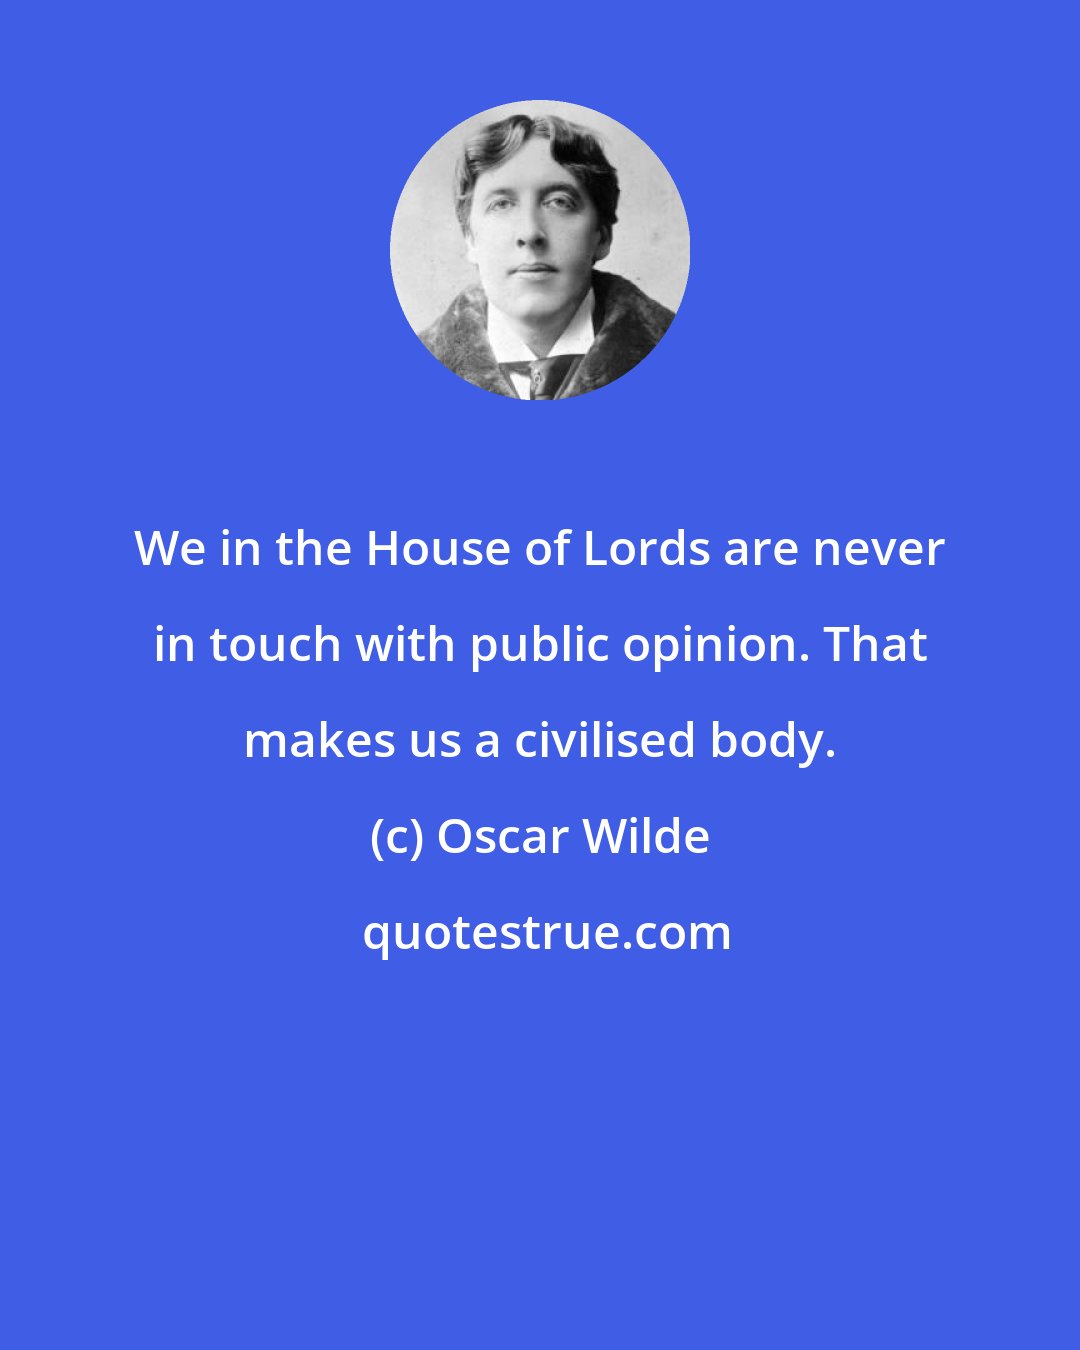 Oscar Wilde: We in the House of Lords are never in touch with public opinion. That makes us a civilised body.